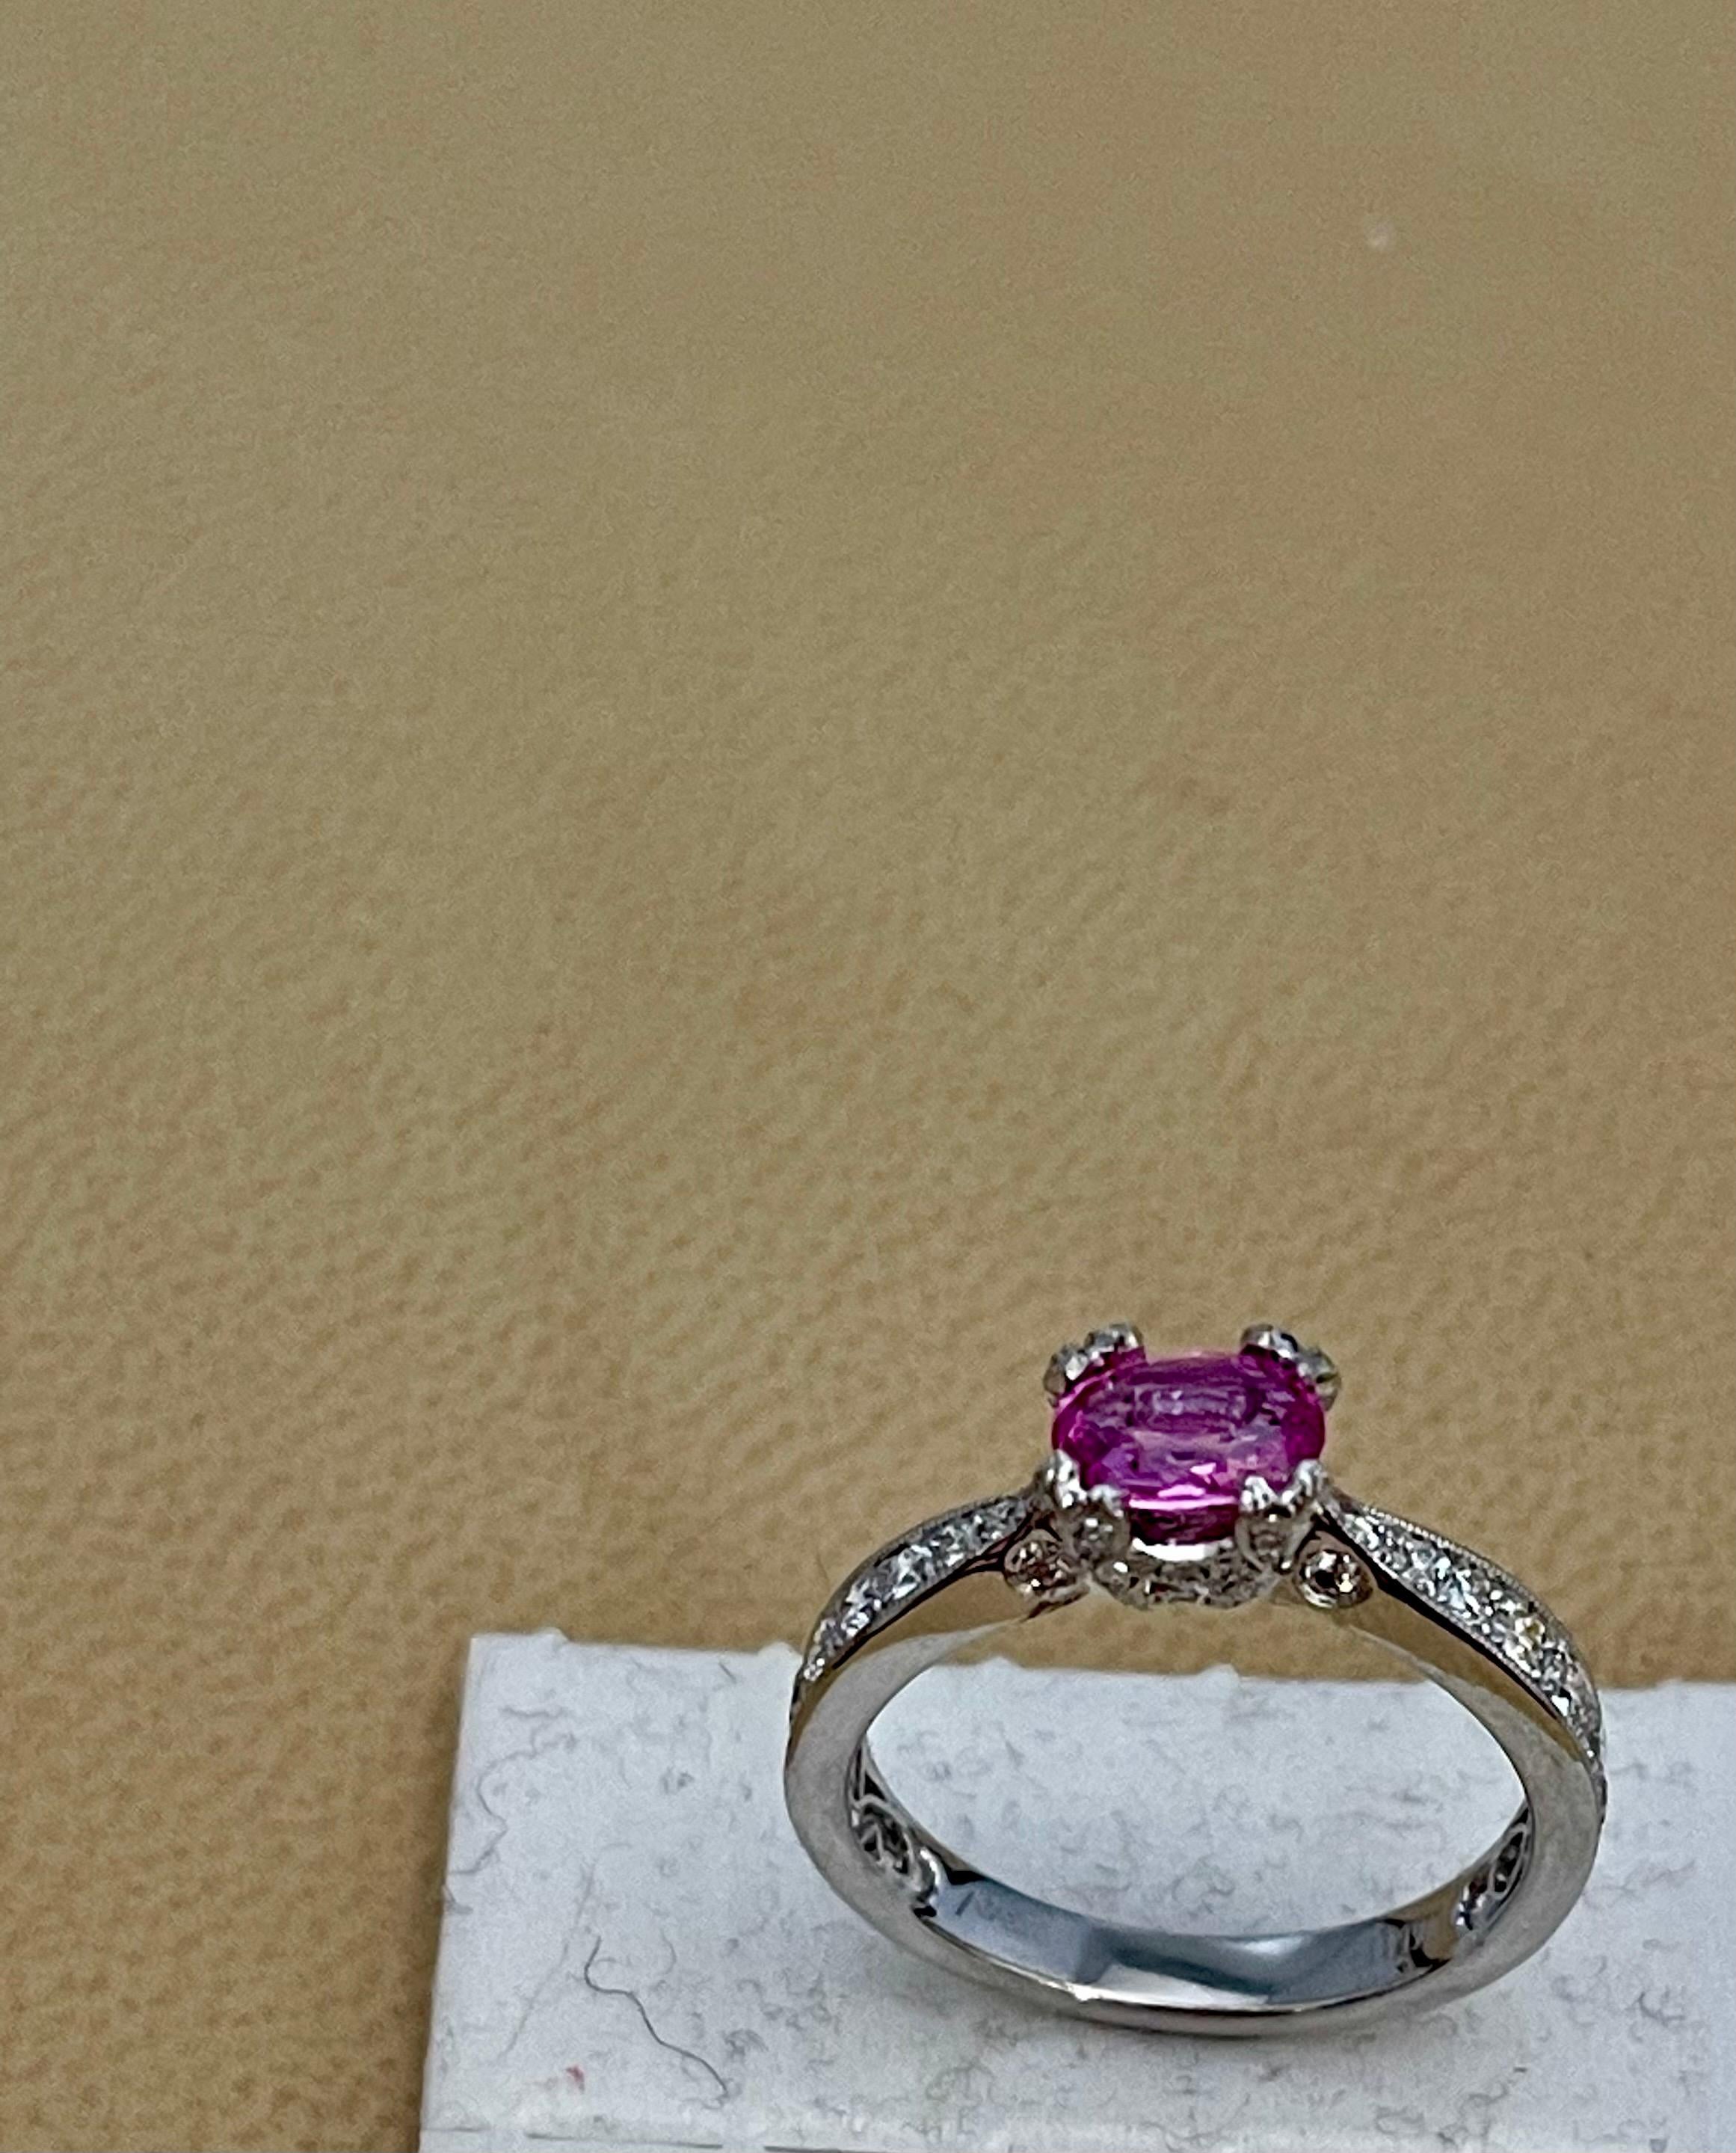 1 Ct Natural Pink Sapphire & 1.25 Ct Diamond Ring in Platinum For Sale 6